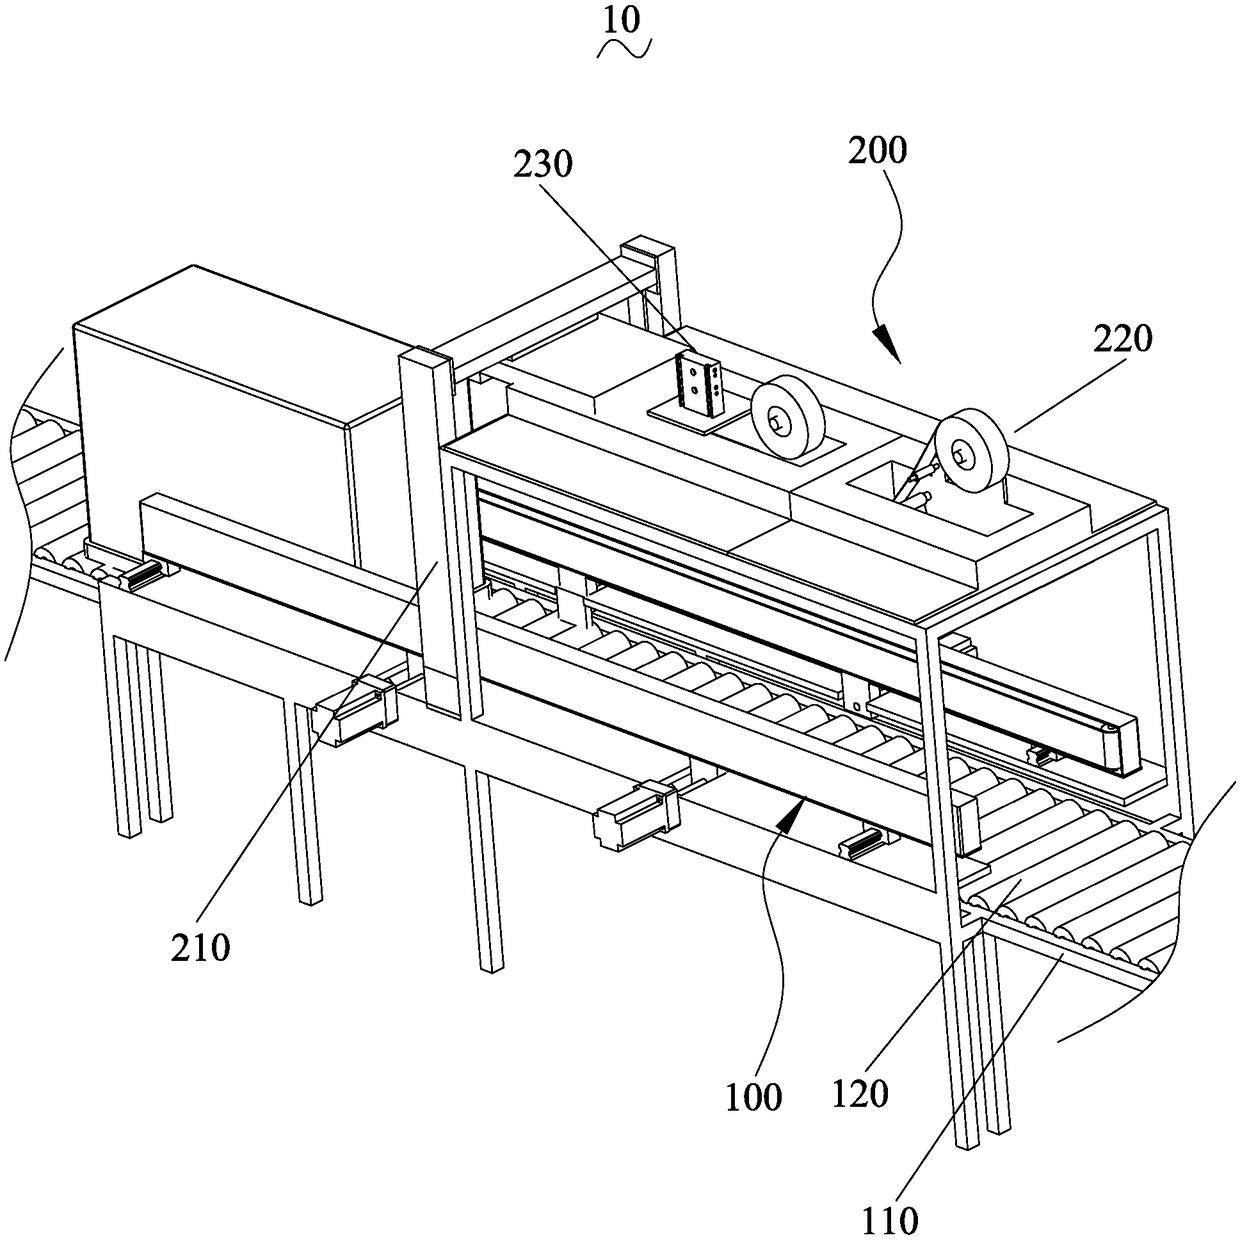 An assembly line automatic sealing mechanism